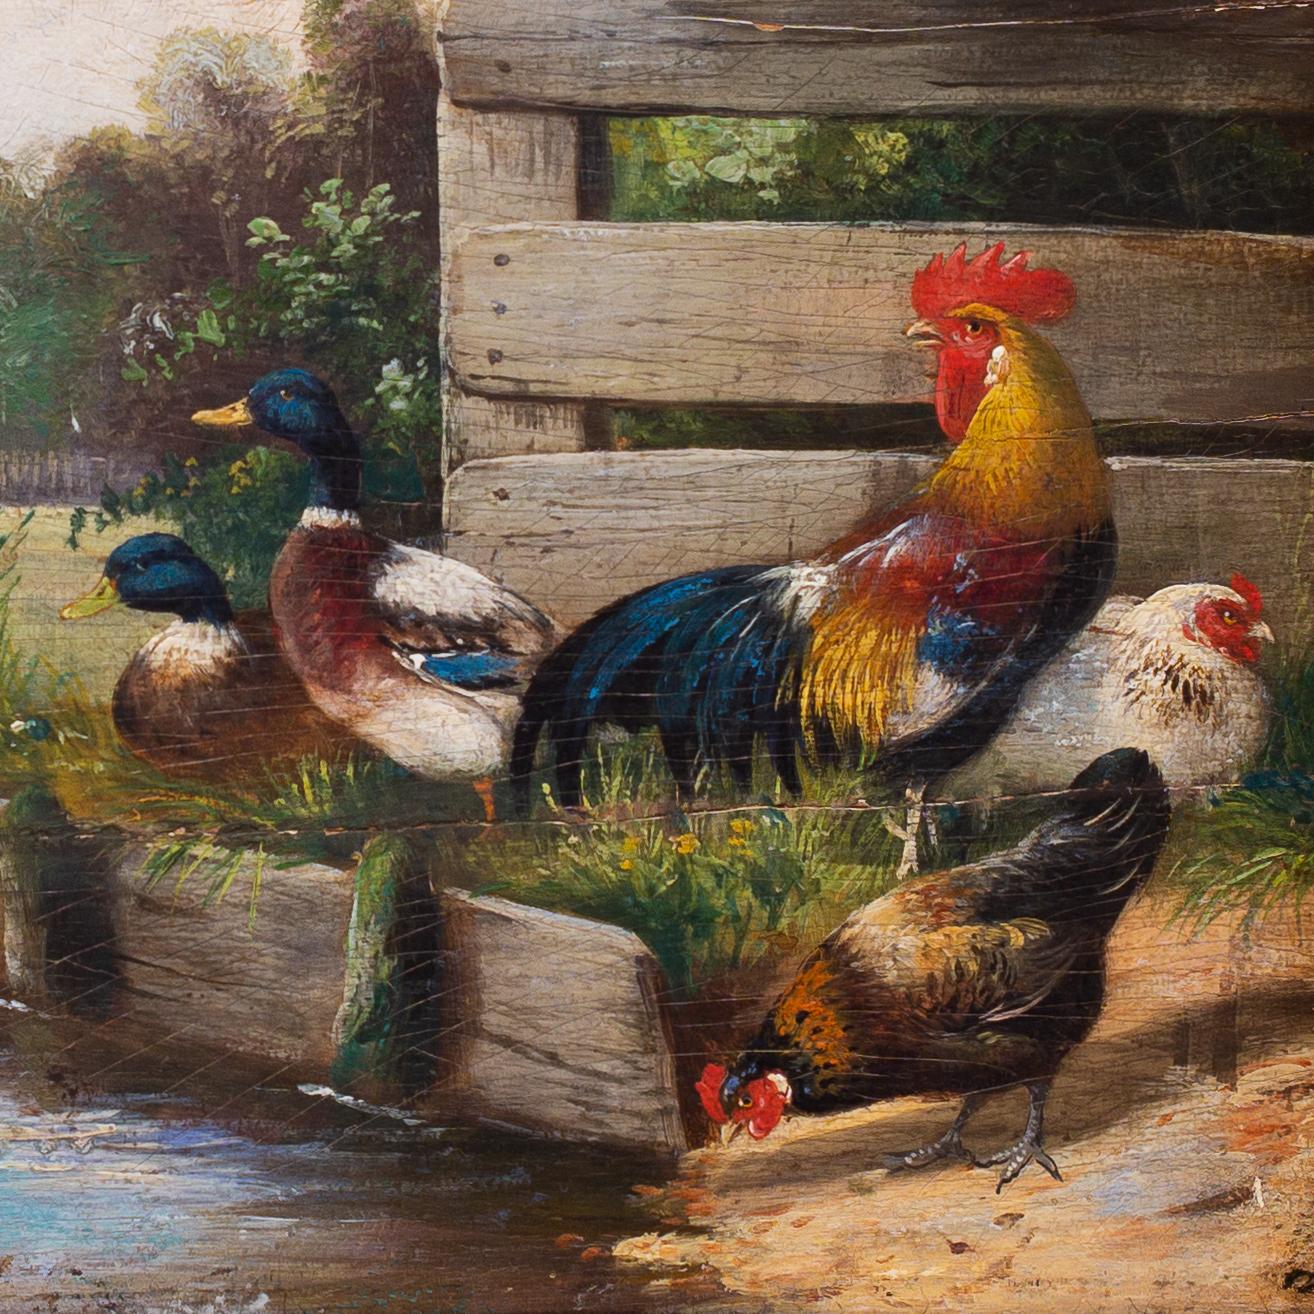 Alfred Schönian (1856-1936) Germany

Rooster With Hens and Ducks by a Pond

oil on panel
signed A.Schönian München
panel dimensions  6.29 x 9.44 inches (16 x 24 cm)
frame 10.43 x 13.58 inches (26.5 x 34.5)

Provenance:
A Swedish Private Collection